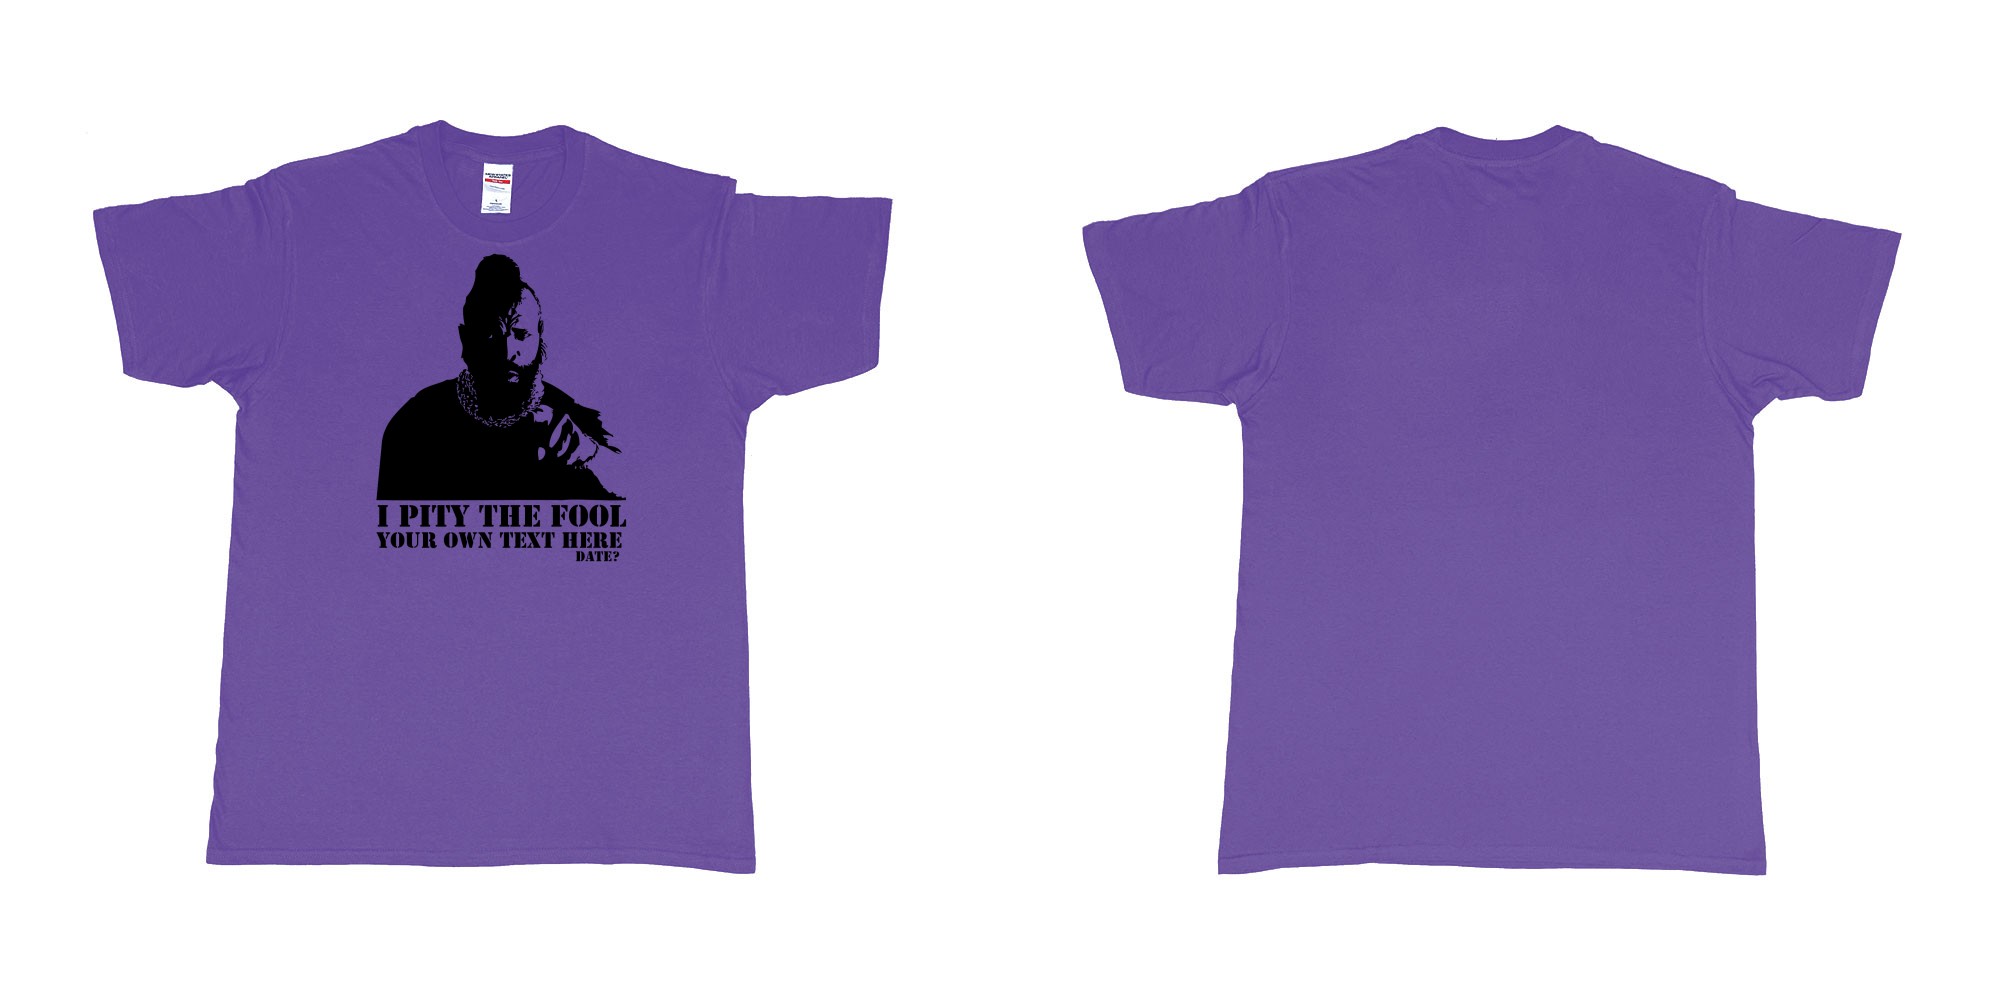 Custom tshirt design I pity the fool in fabric color purple choice your own text made in Bali by The Pirate Way